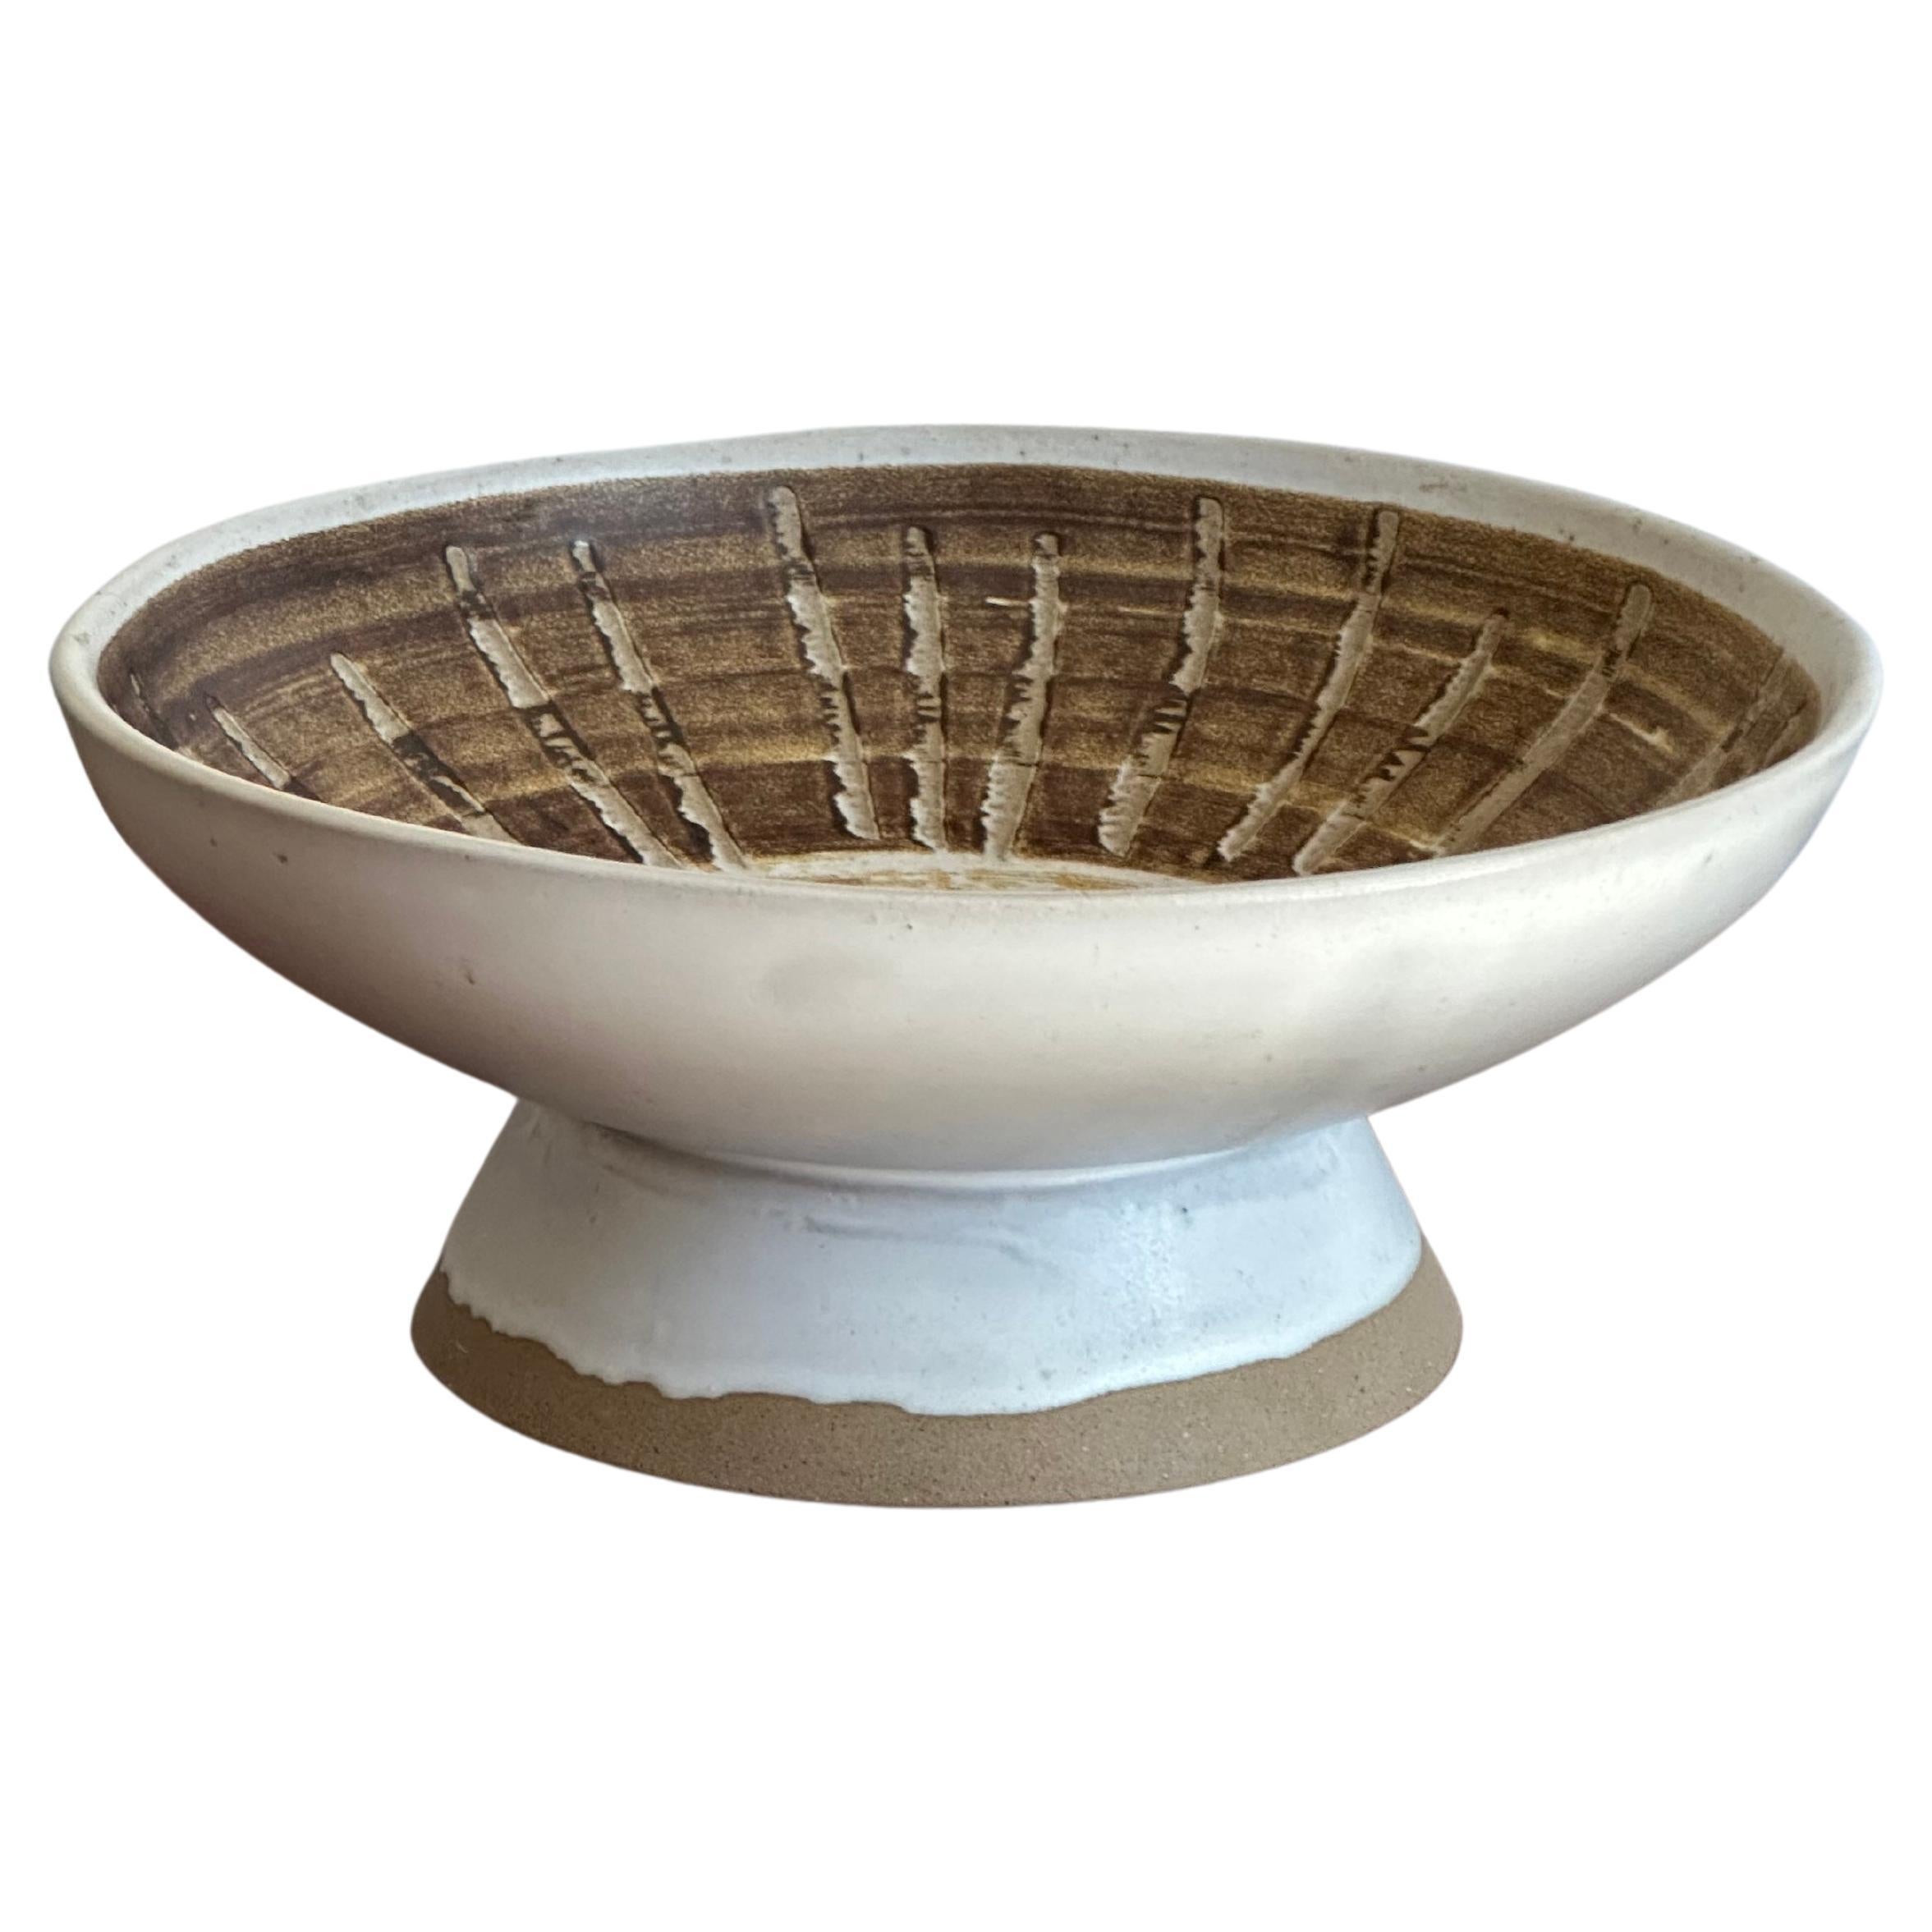 Jane and Gordon Martz Footed Bowl for Marshall Studios